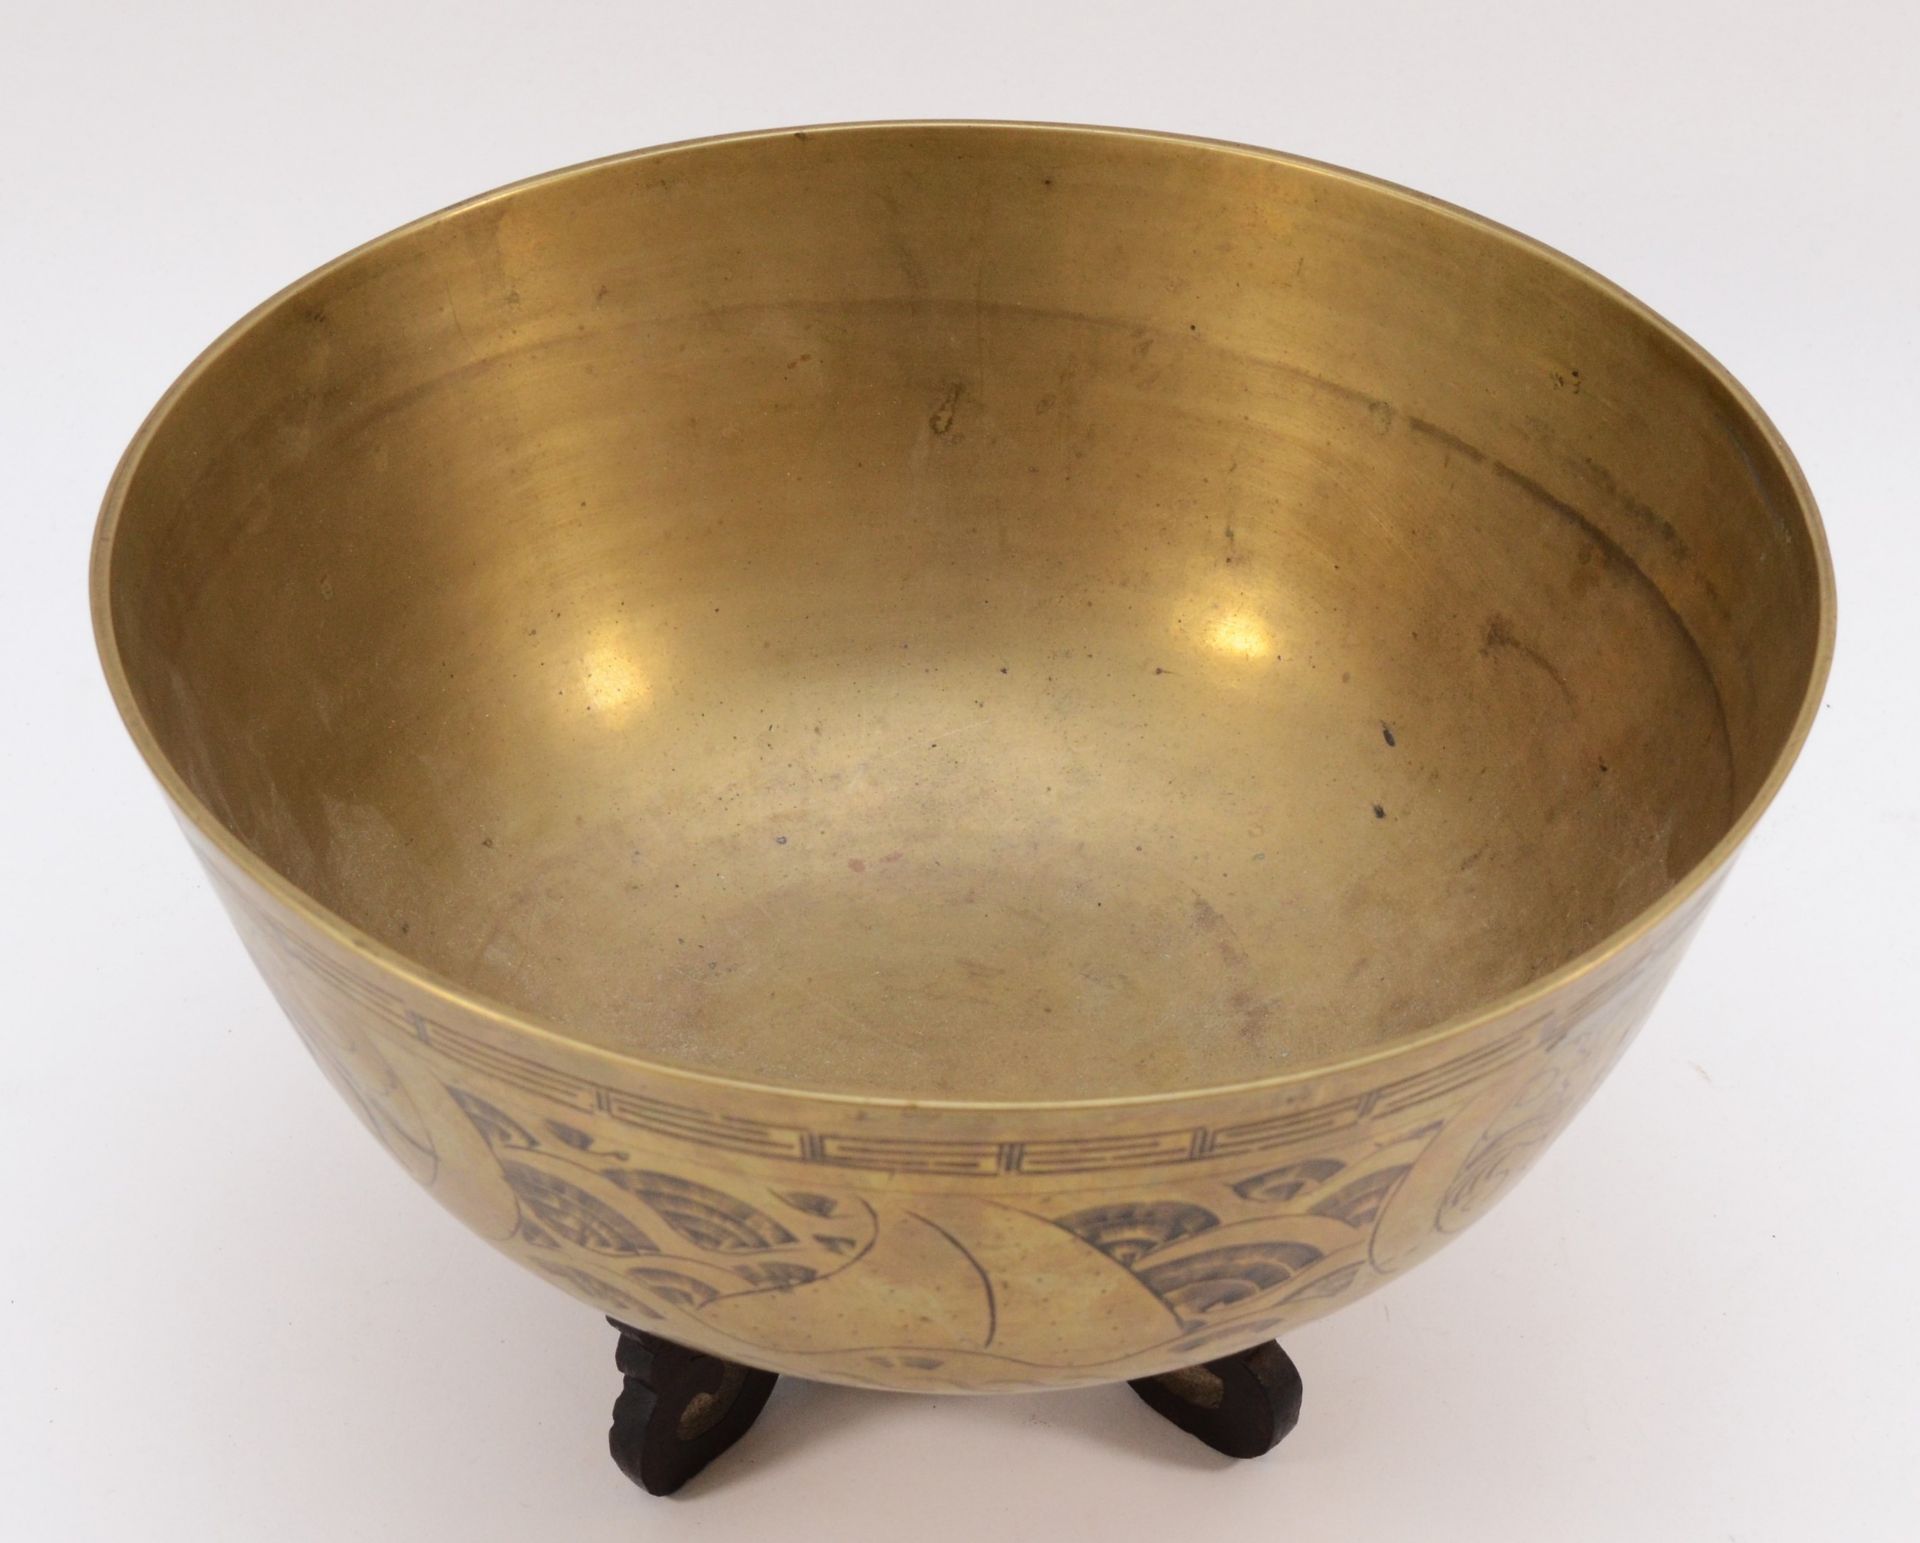 A 20th century Chinese brass singing bowl, engraved border with dragons in clouds, character mark to - Image 3 of 3